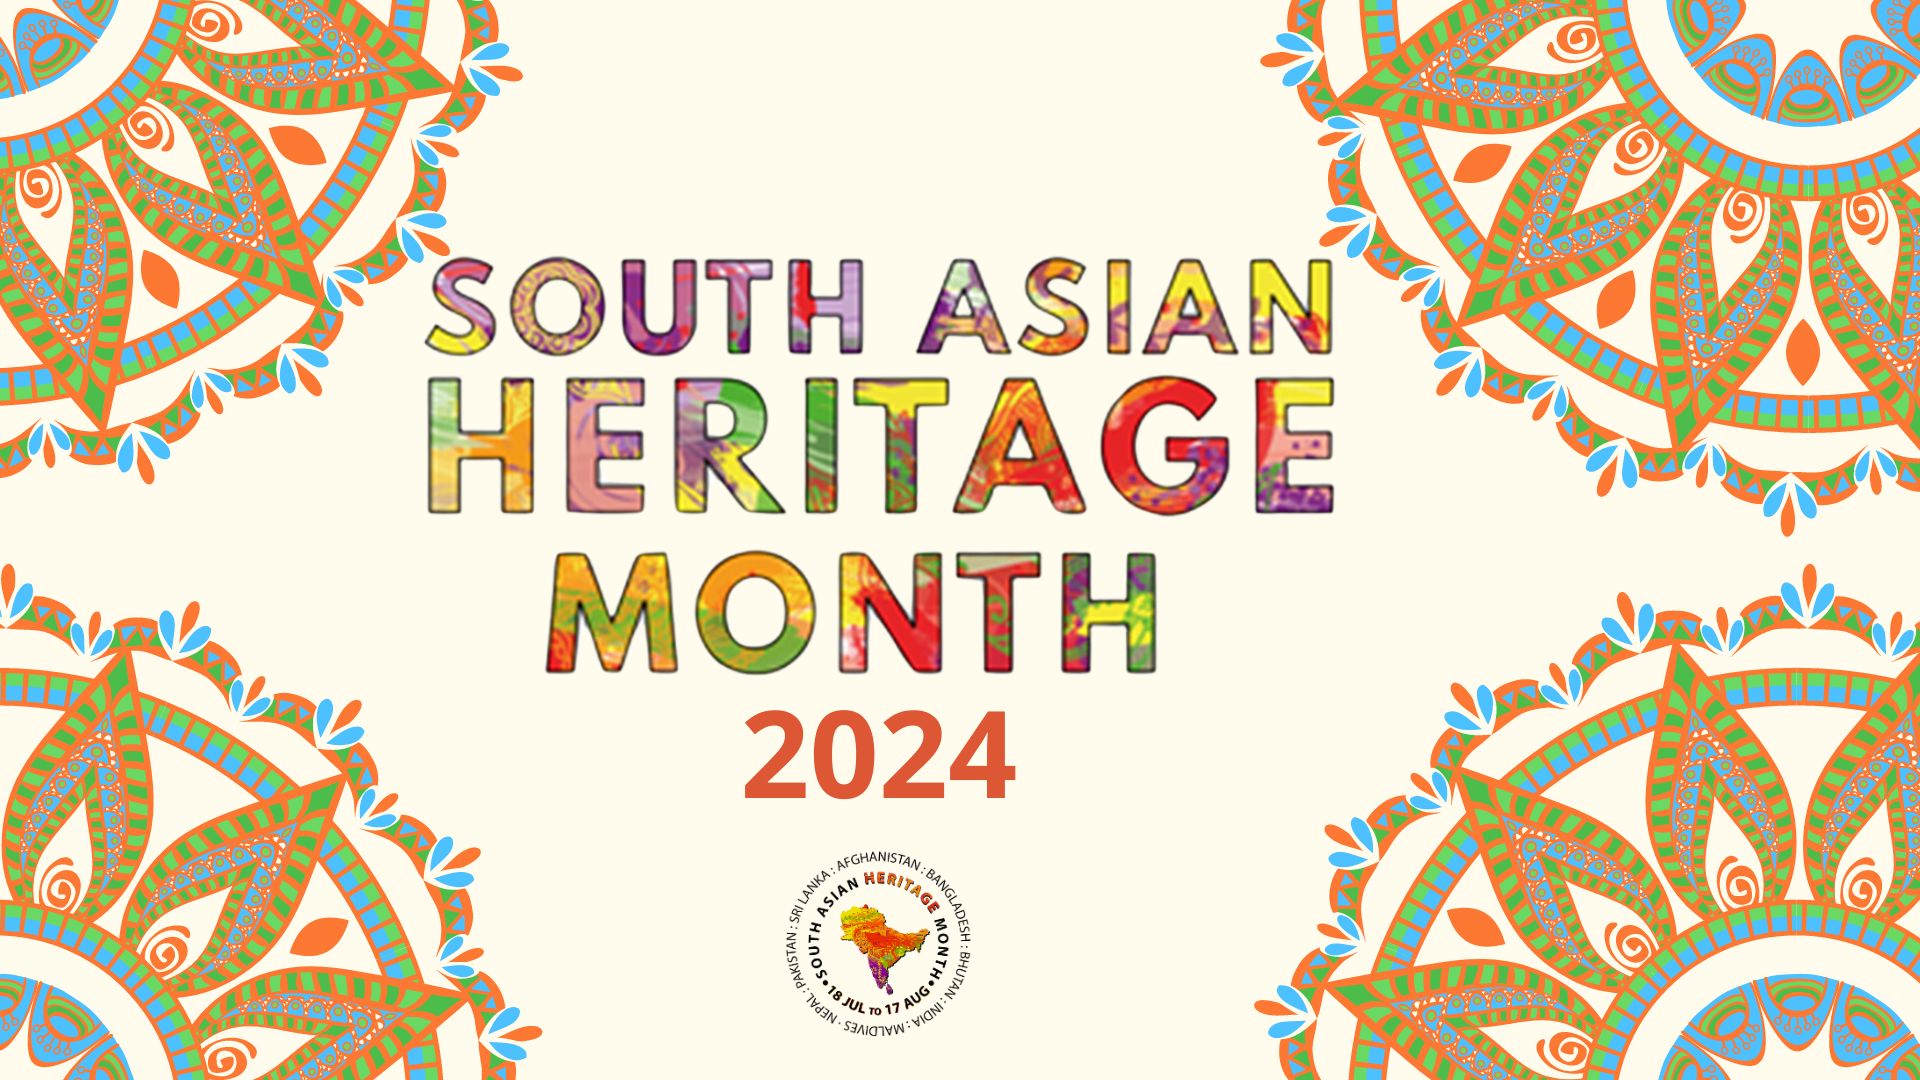 South Asian Heritage Month 2024